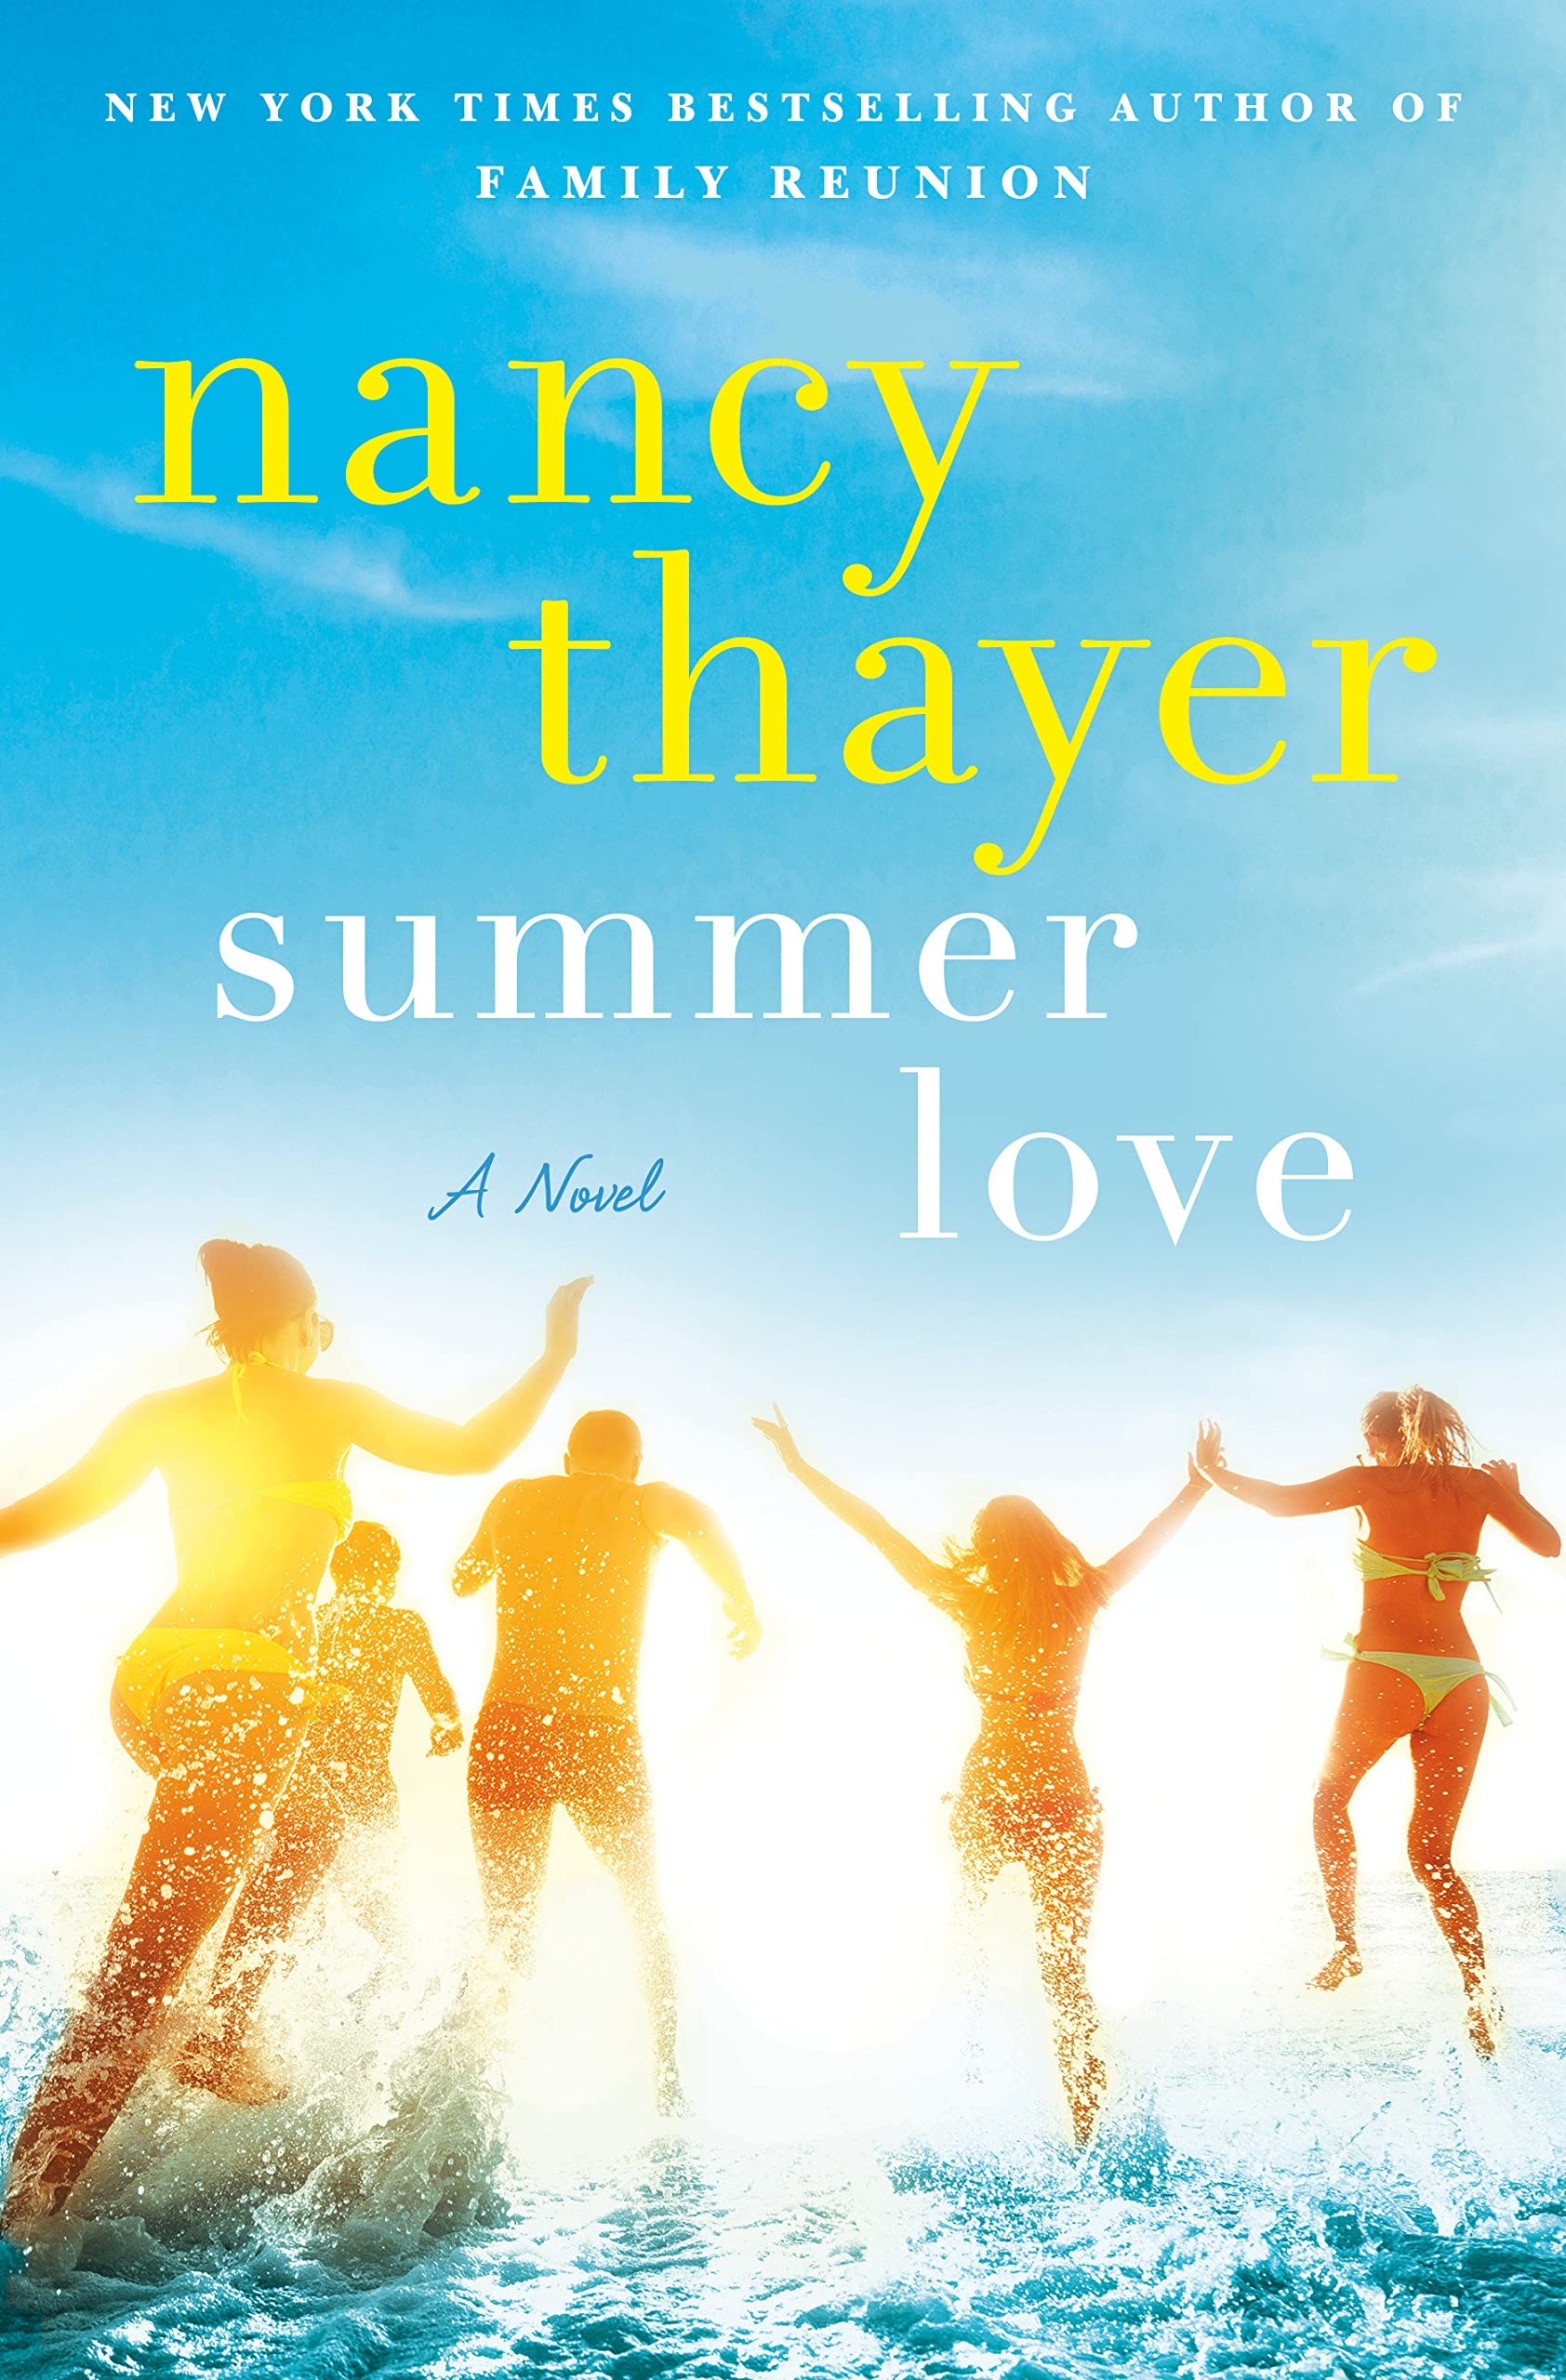 Image for "Summer Love"